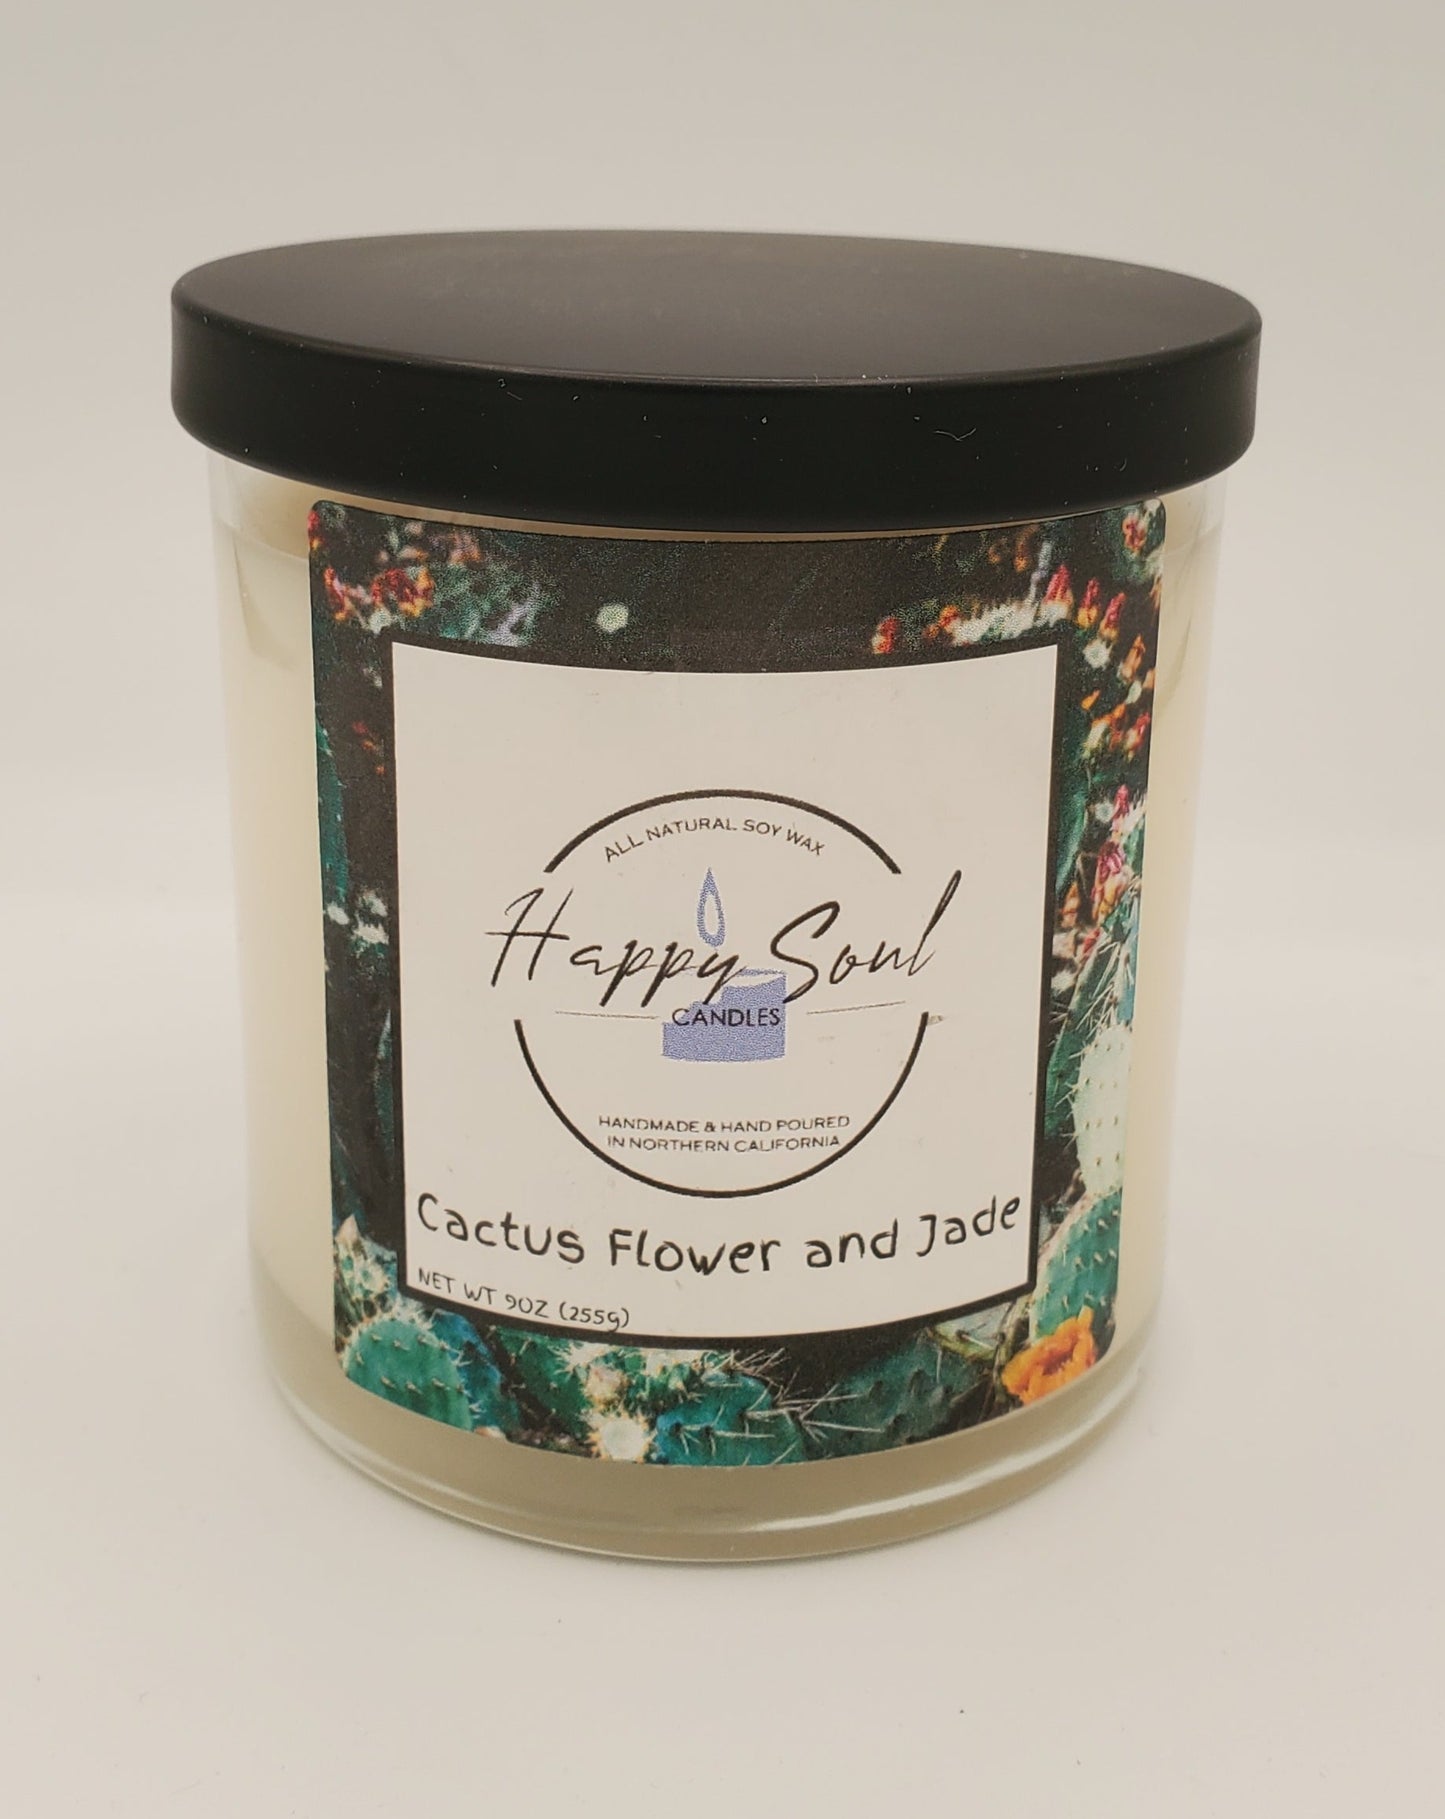 Cactus Flower and Jade 9 oz Soy Candle